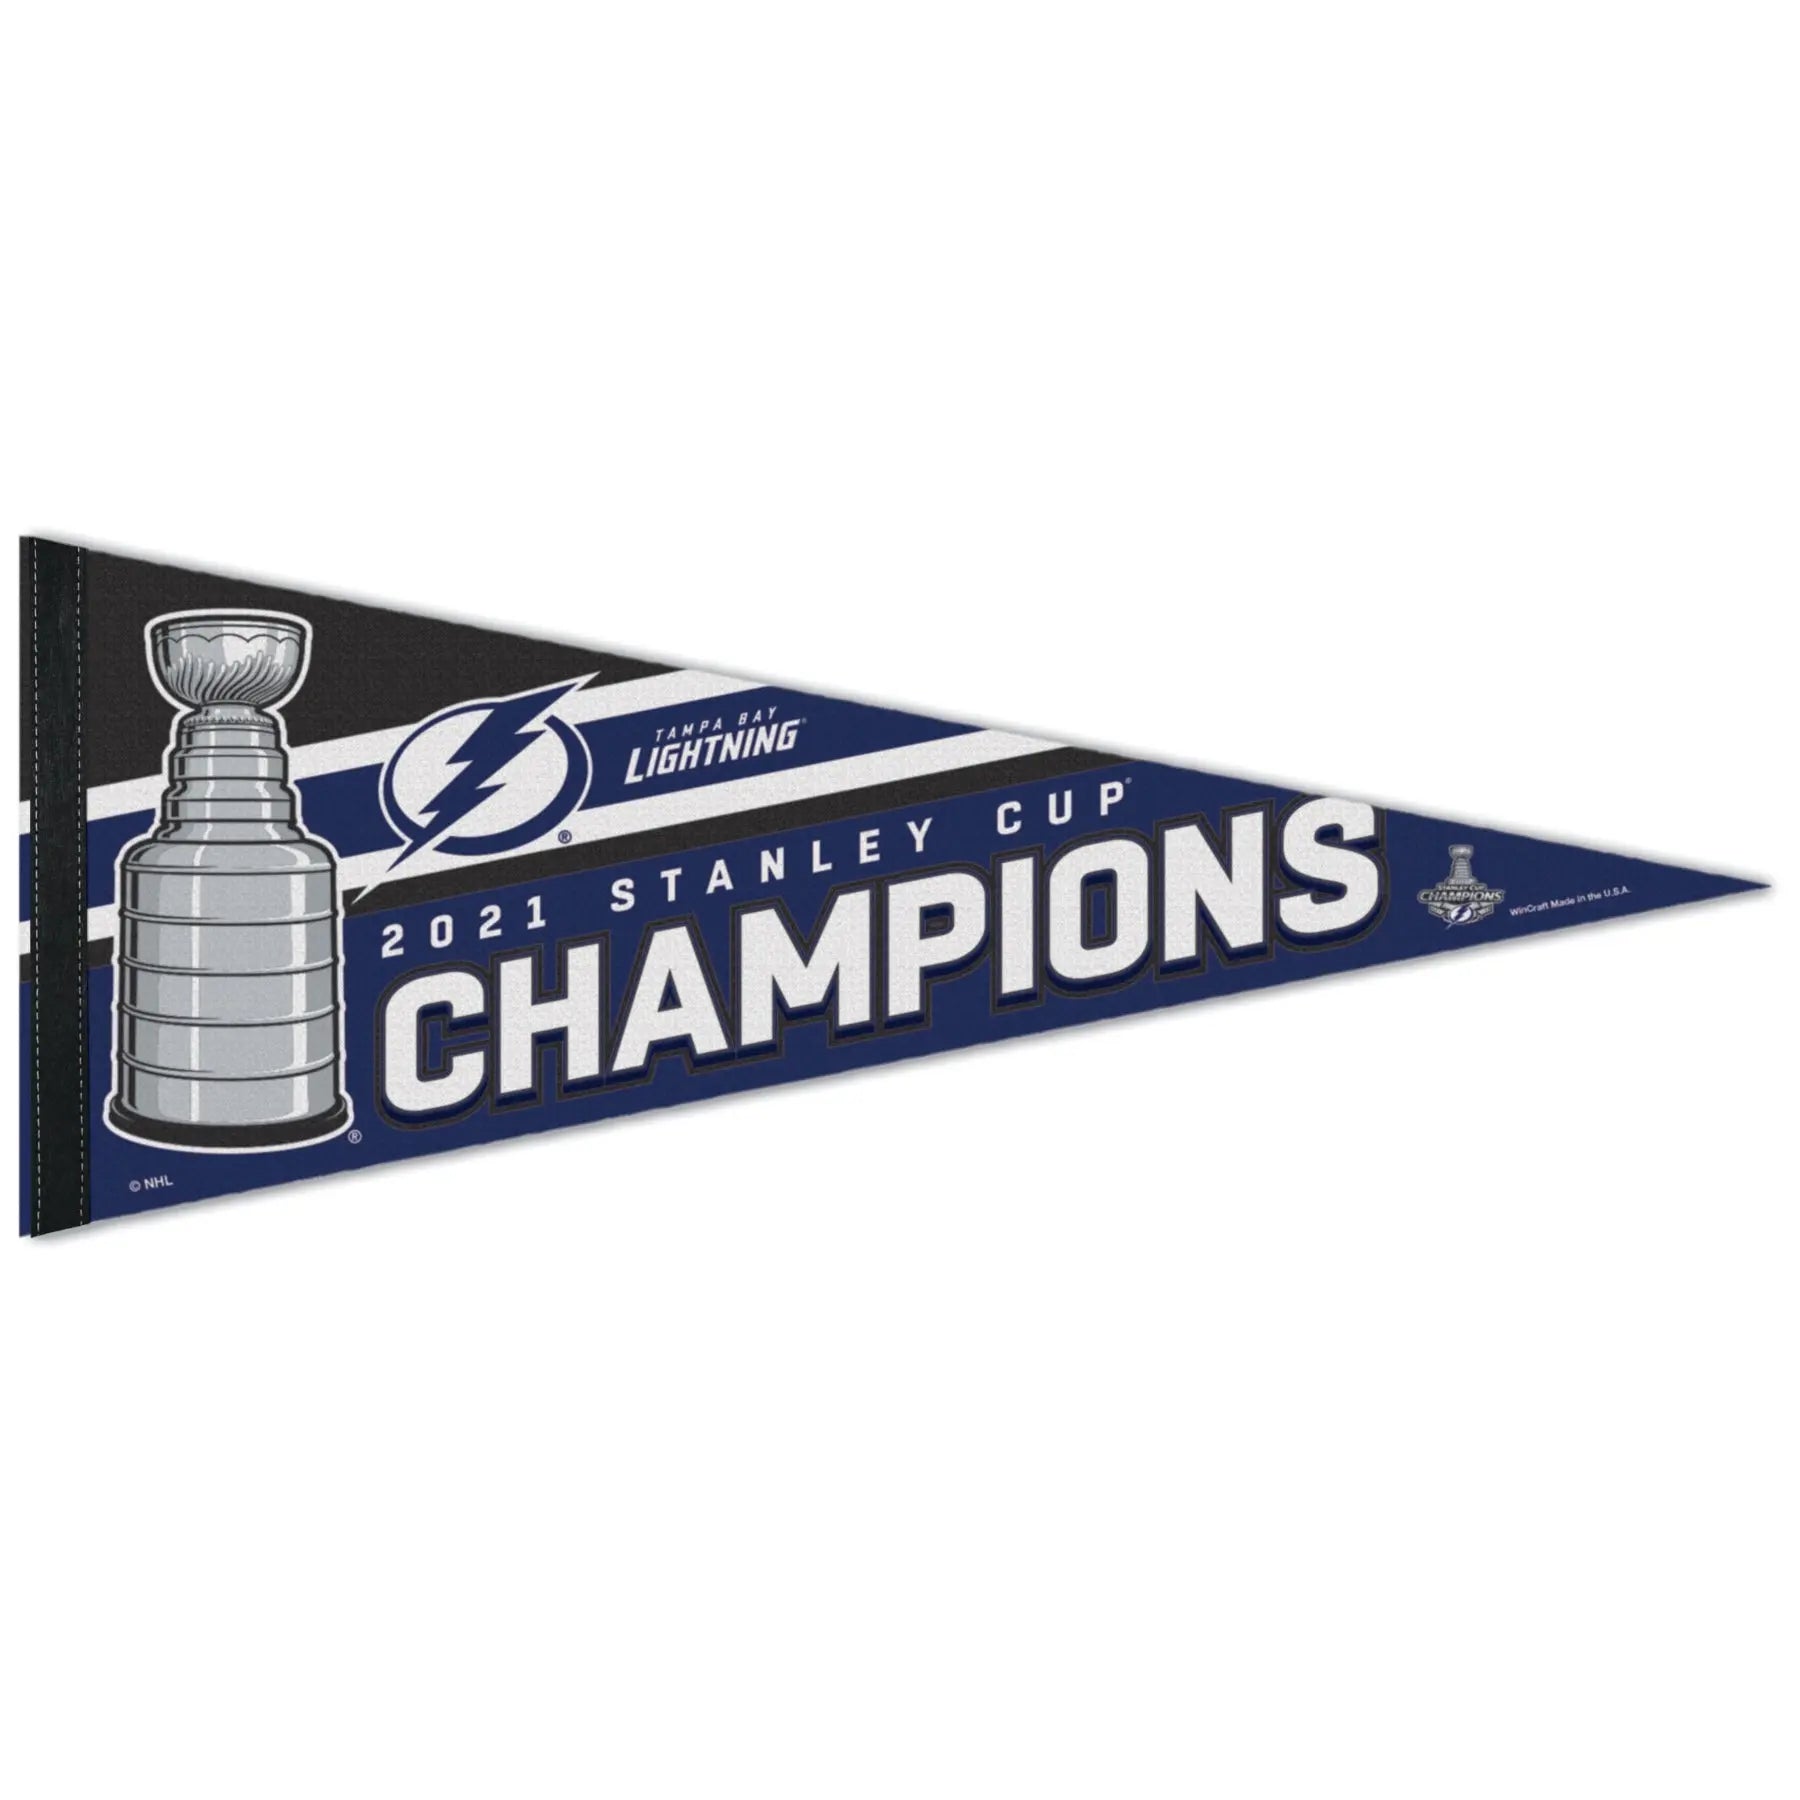 Tampa Bay Lightning Large Decal Sticker, 2020 NHL Stanley Cup Champions